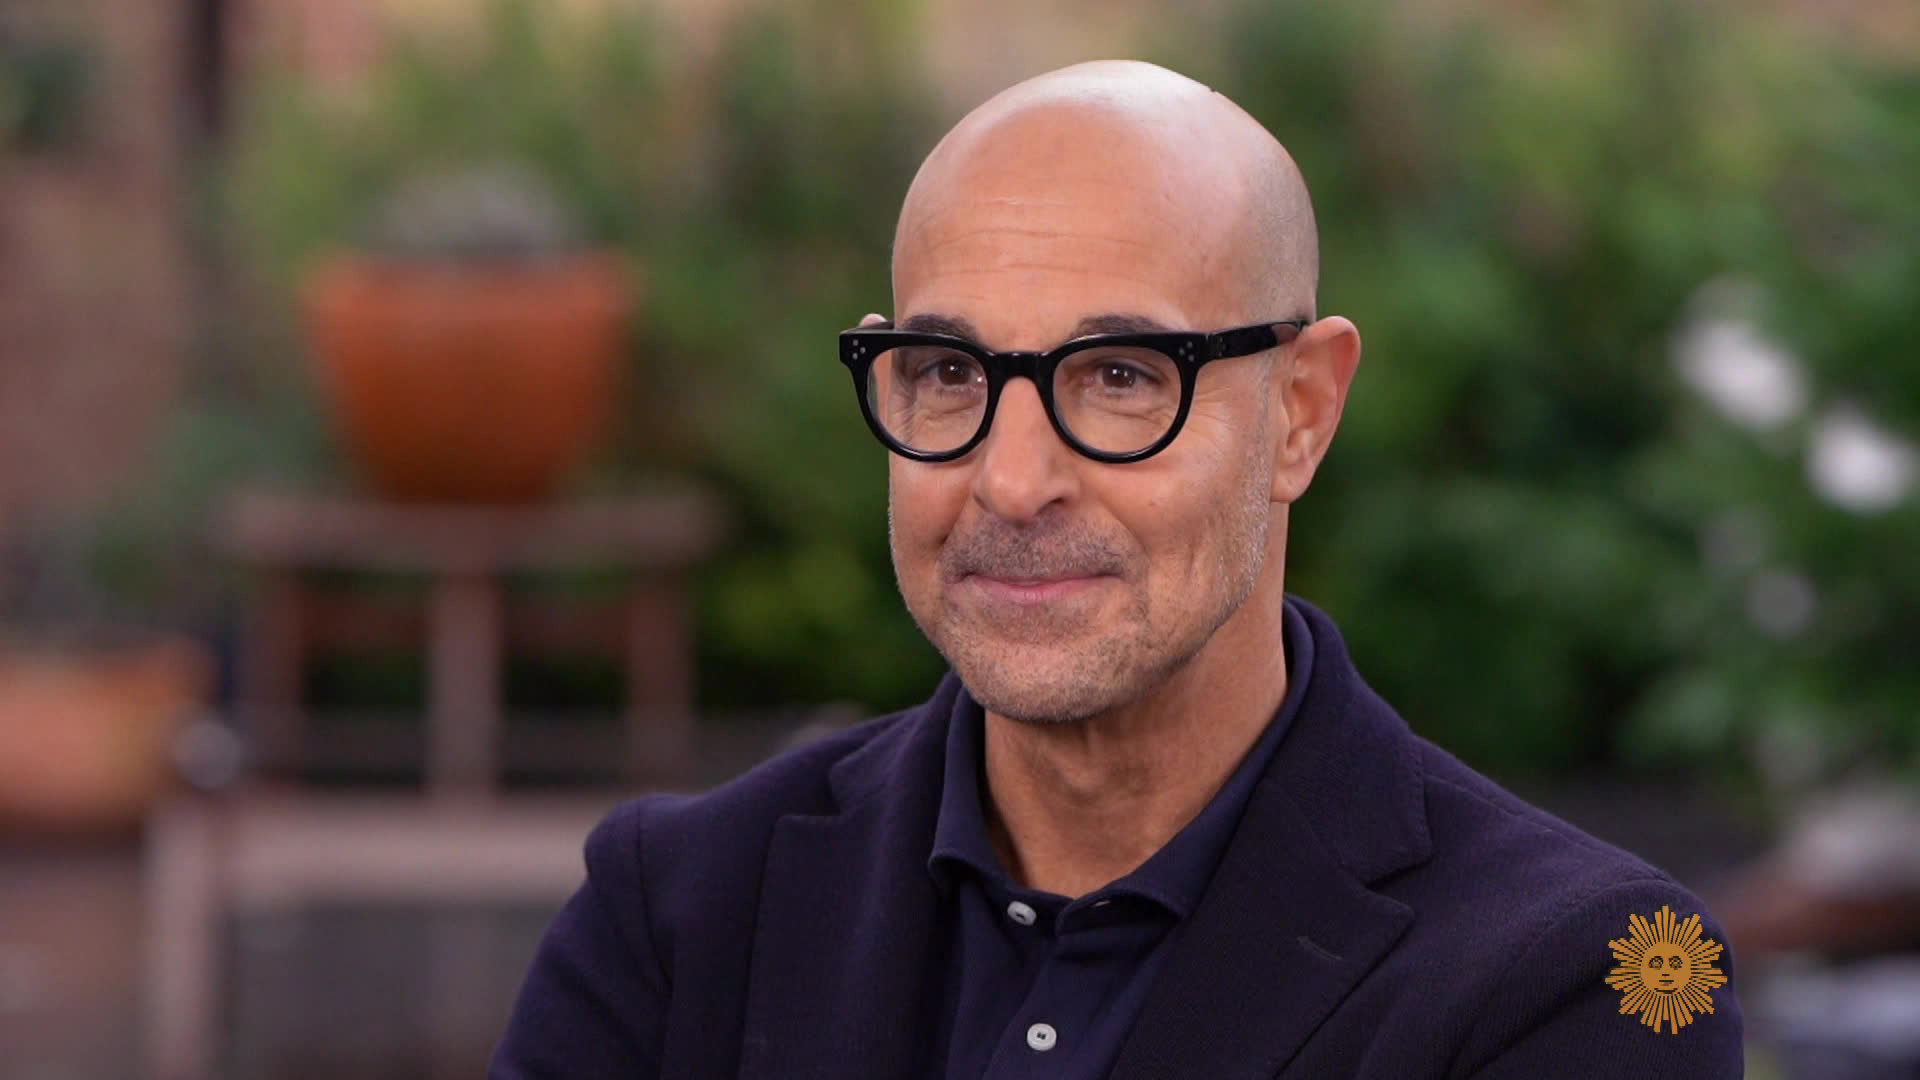 Watch Sunday Morning: In Conversation: Stanley Tucci - Full show on CBS